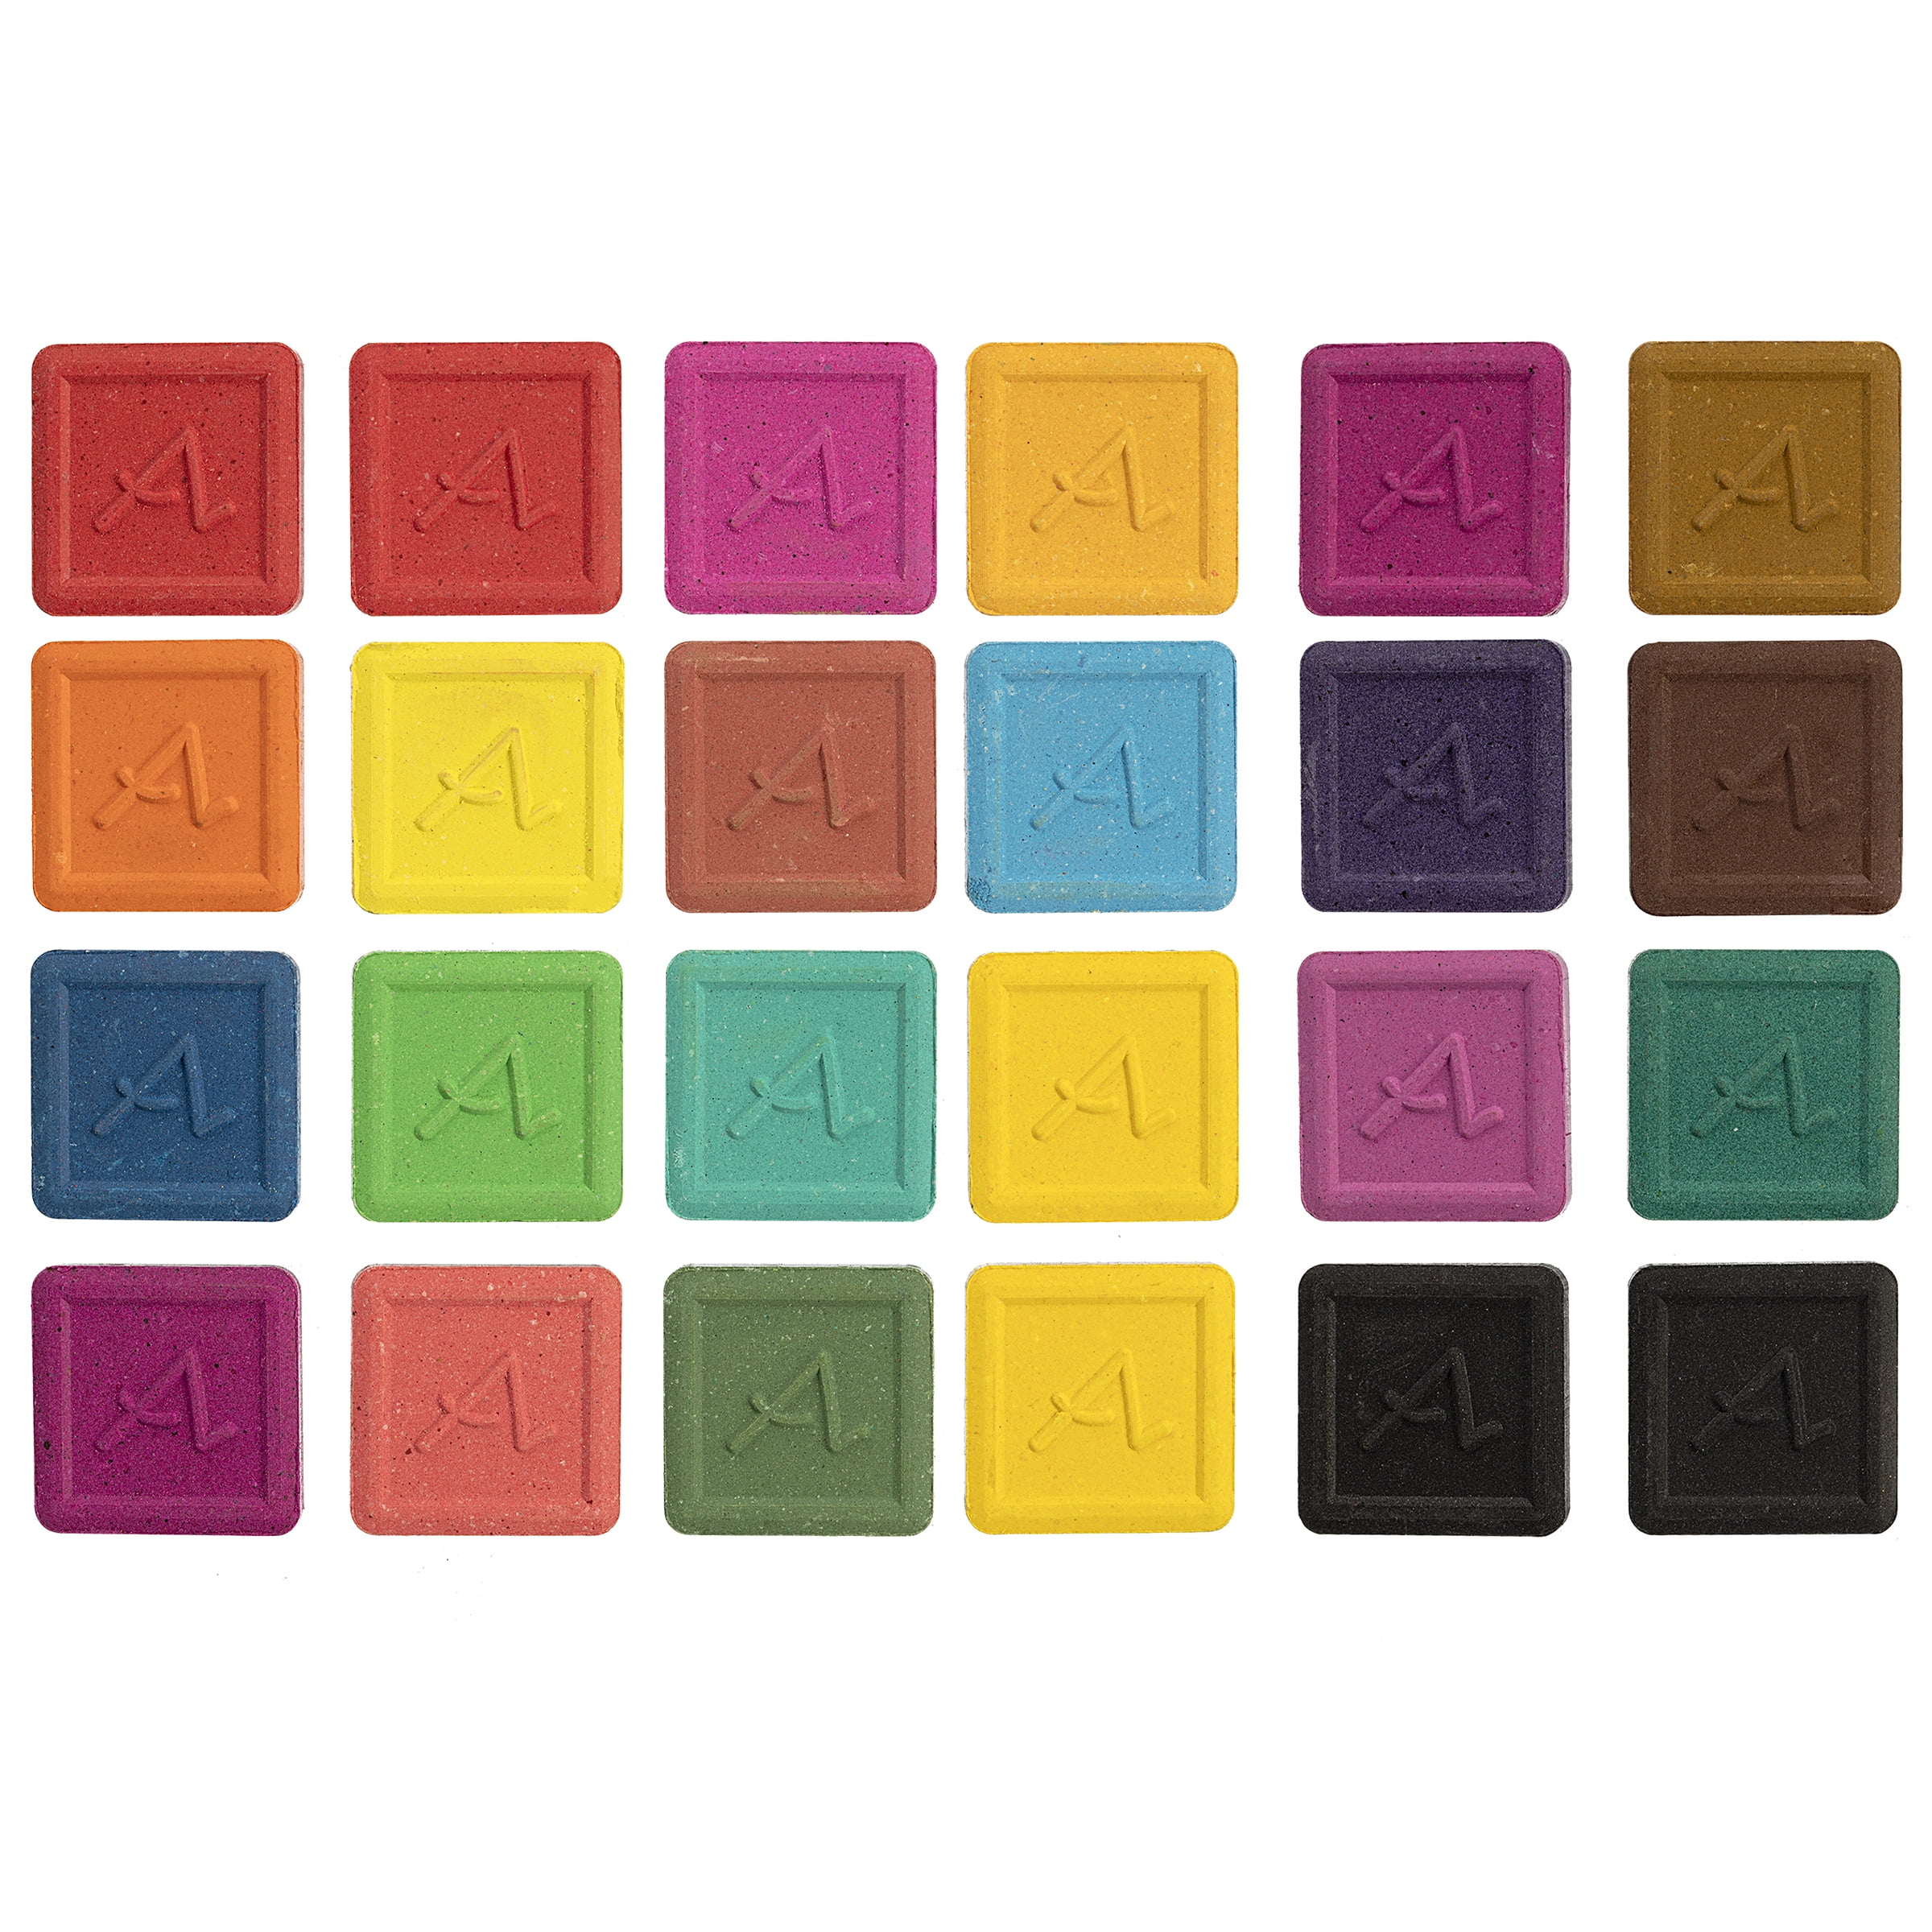  Darice Studio Kids Art Set Assorted Case, 71 Pieces, 70 Pc  Metal Color May Vary, Multi, Count